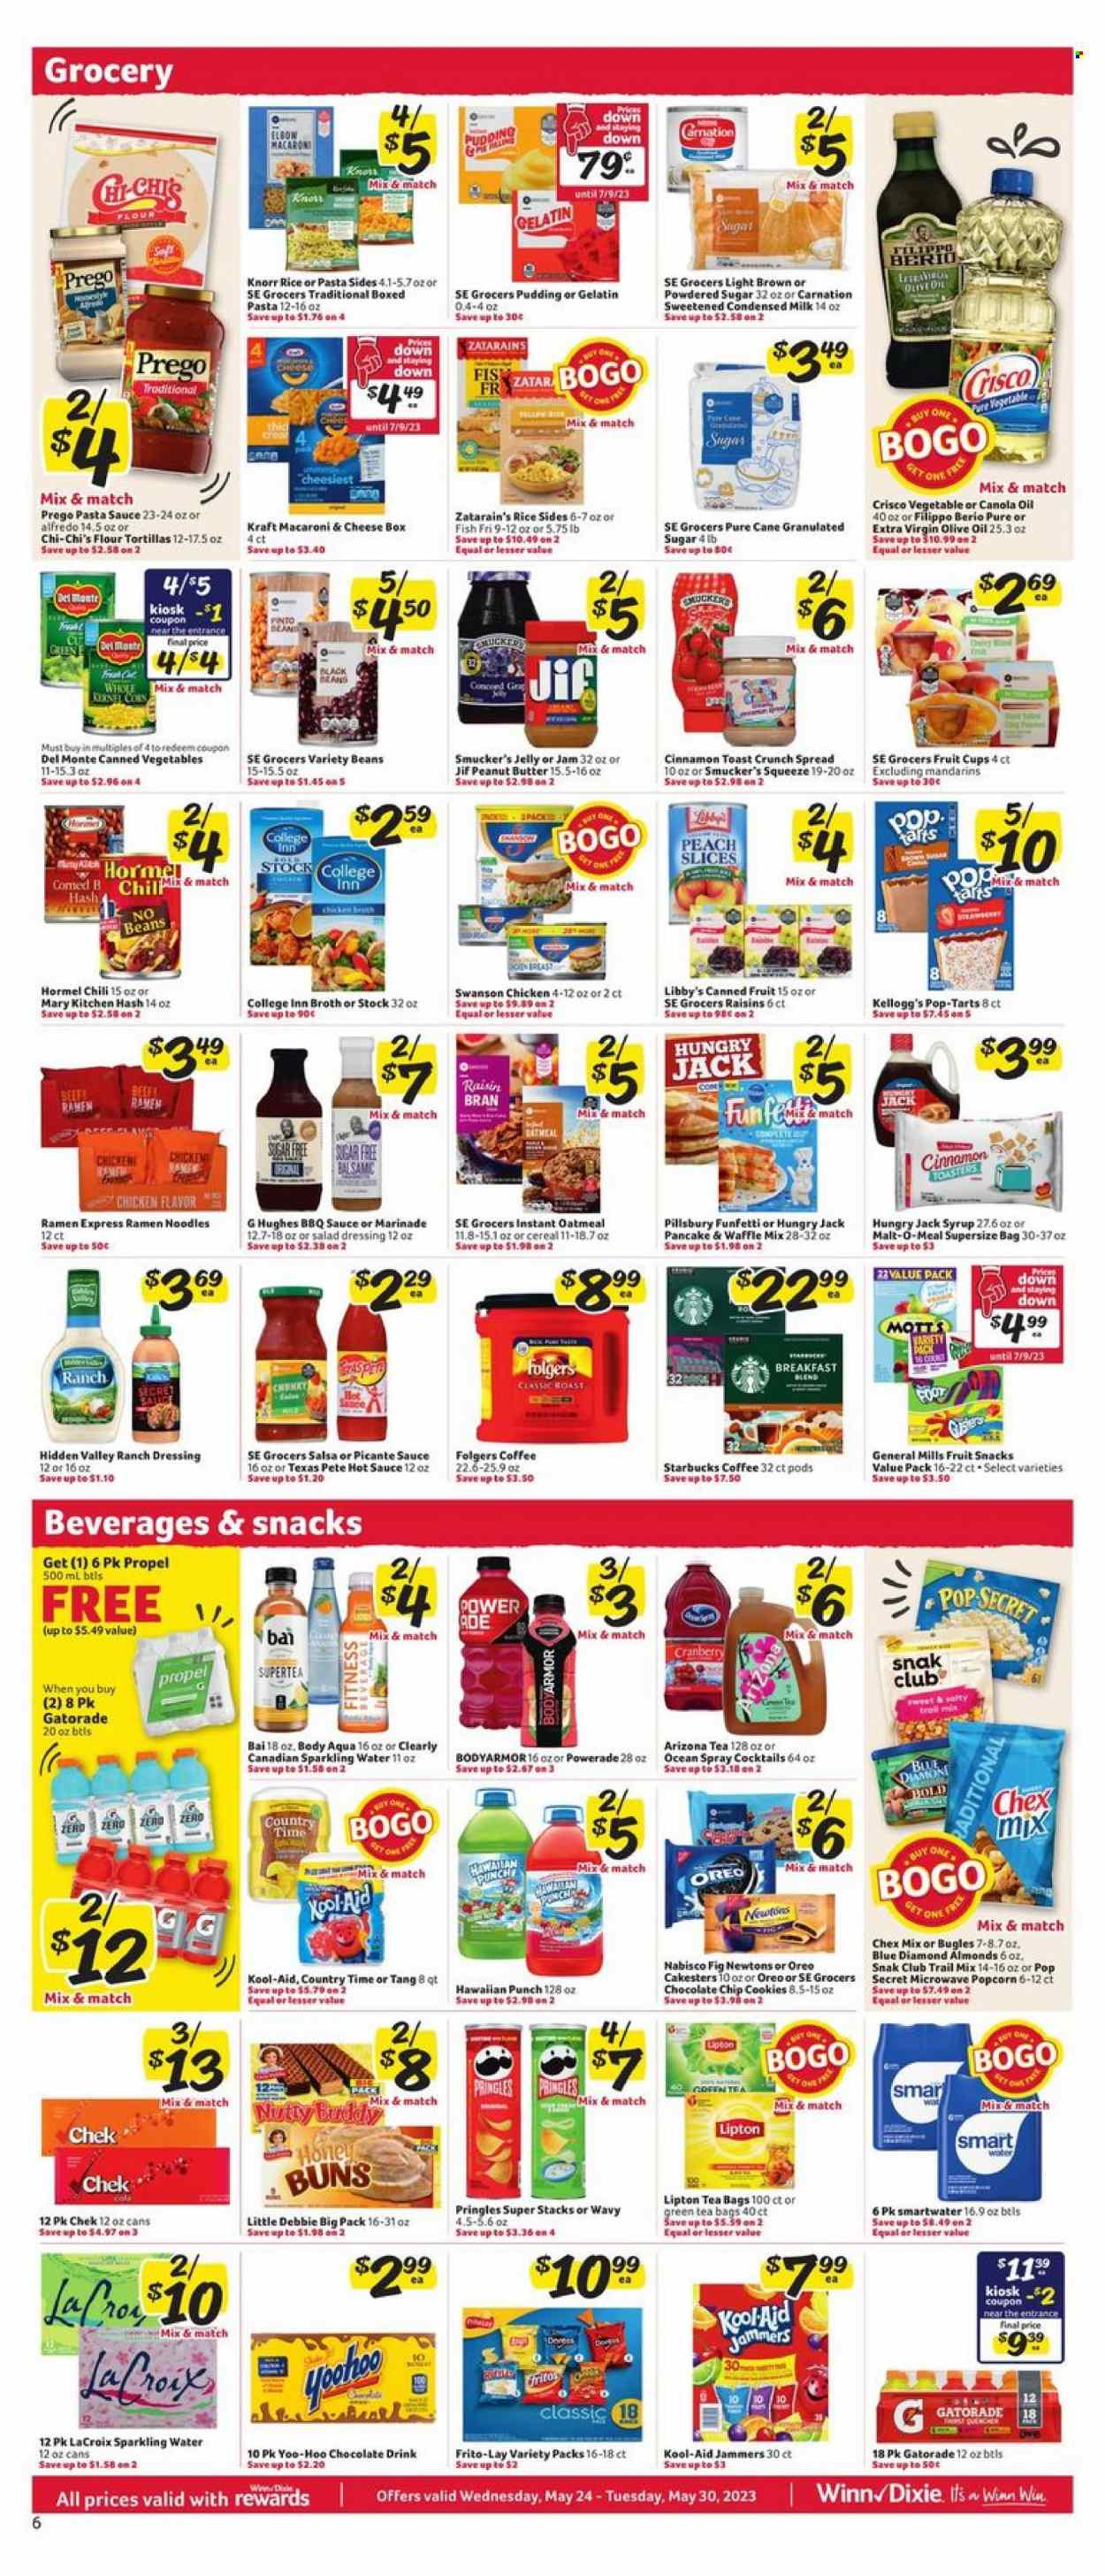 thumbnail - Winn Dixie Flyer - 05/24/2023 - 05/30/2023 - Sales products - buns, flour tortillas, corn, mandarines, fruit cup, Mott's, macaroni & cheese, ramen, pasta sauce, Knorr, sauce, pancakes, Pillsbury, noodles, pasta sides, Kraft®, Hormel, roast, ready meal, pudding, condensed milk, ranch dressing, cookies, chocolate chips, jelly, Kellogg's, Pop-Tarts, fruit snack, Nabisco, Pringles, popcorn, Frito-Lay, Chex Mix, salty snack, cane sugar, Crisco, granulated sugar, oatmeal, icing sugar, broth, malt, black beans, pinto beans, canned vegetables, canned fruit, Del Monte, Raisin Bran, cinnamon, BBQ sauce, salad dressing, hot sauce, dressing, salsa, marinade, canola oil, extra virgin olive oil, olive oil, oil, honey, peanut butter, syrup, Jif, almonds, Blue Diamond, trail mix, Powerade, energy drink, Lipton, AriZona, Bai, Country Time, Gatorade, sparkling water, Smartwater, water, chocolate drink, powder drink, green tea, tea bags, coffee, Starbucks, Folgers, breakfast blend, alcohol, gelatin, Secret Sauce, electrolyte drink. Page 6.